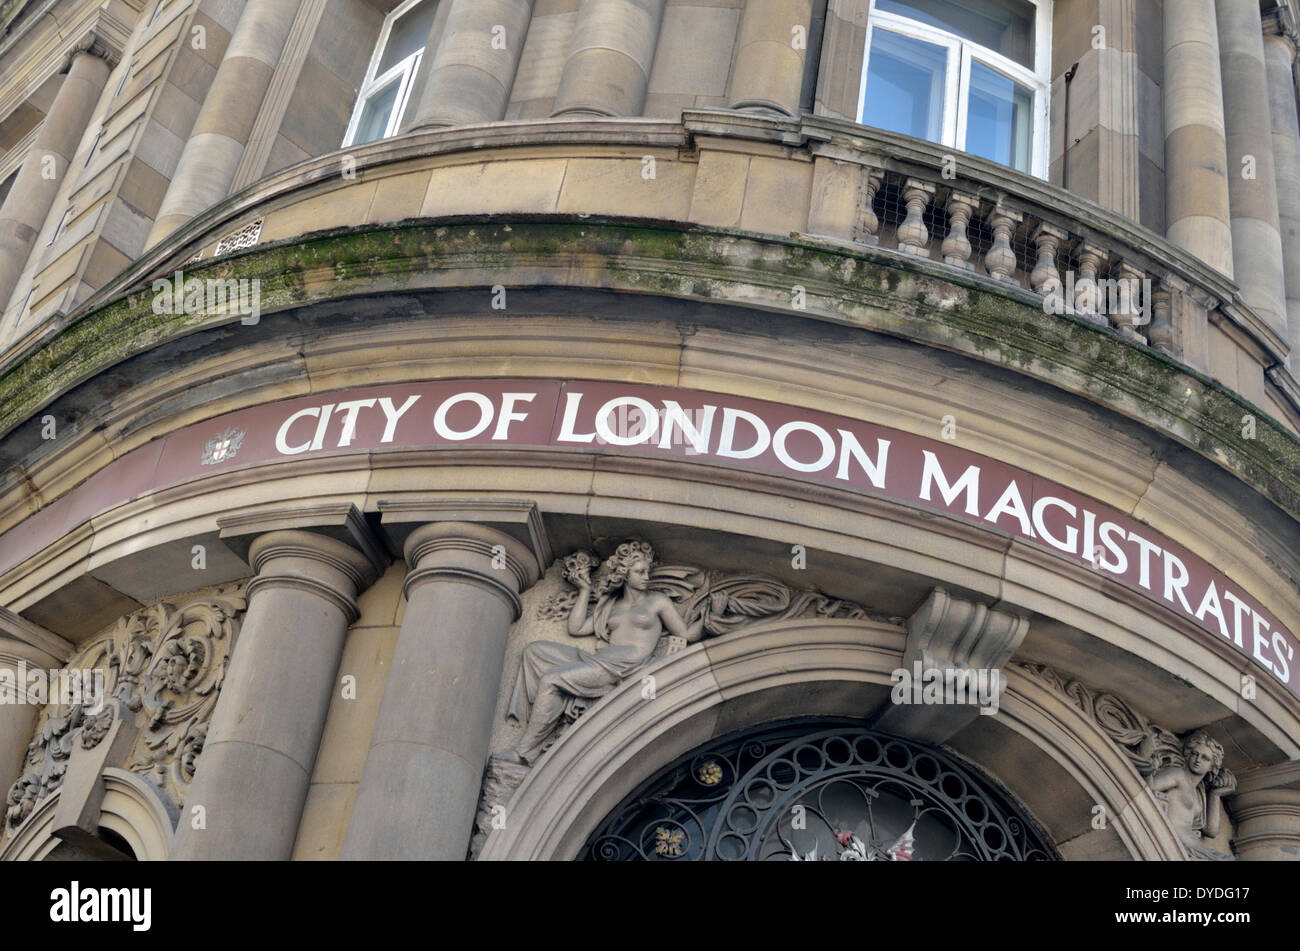 City of London Magistrates Court in Queen Victoria Street. Stockfoto